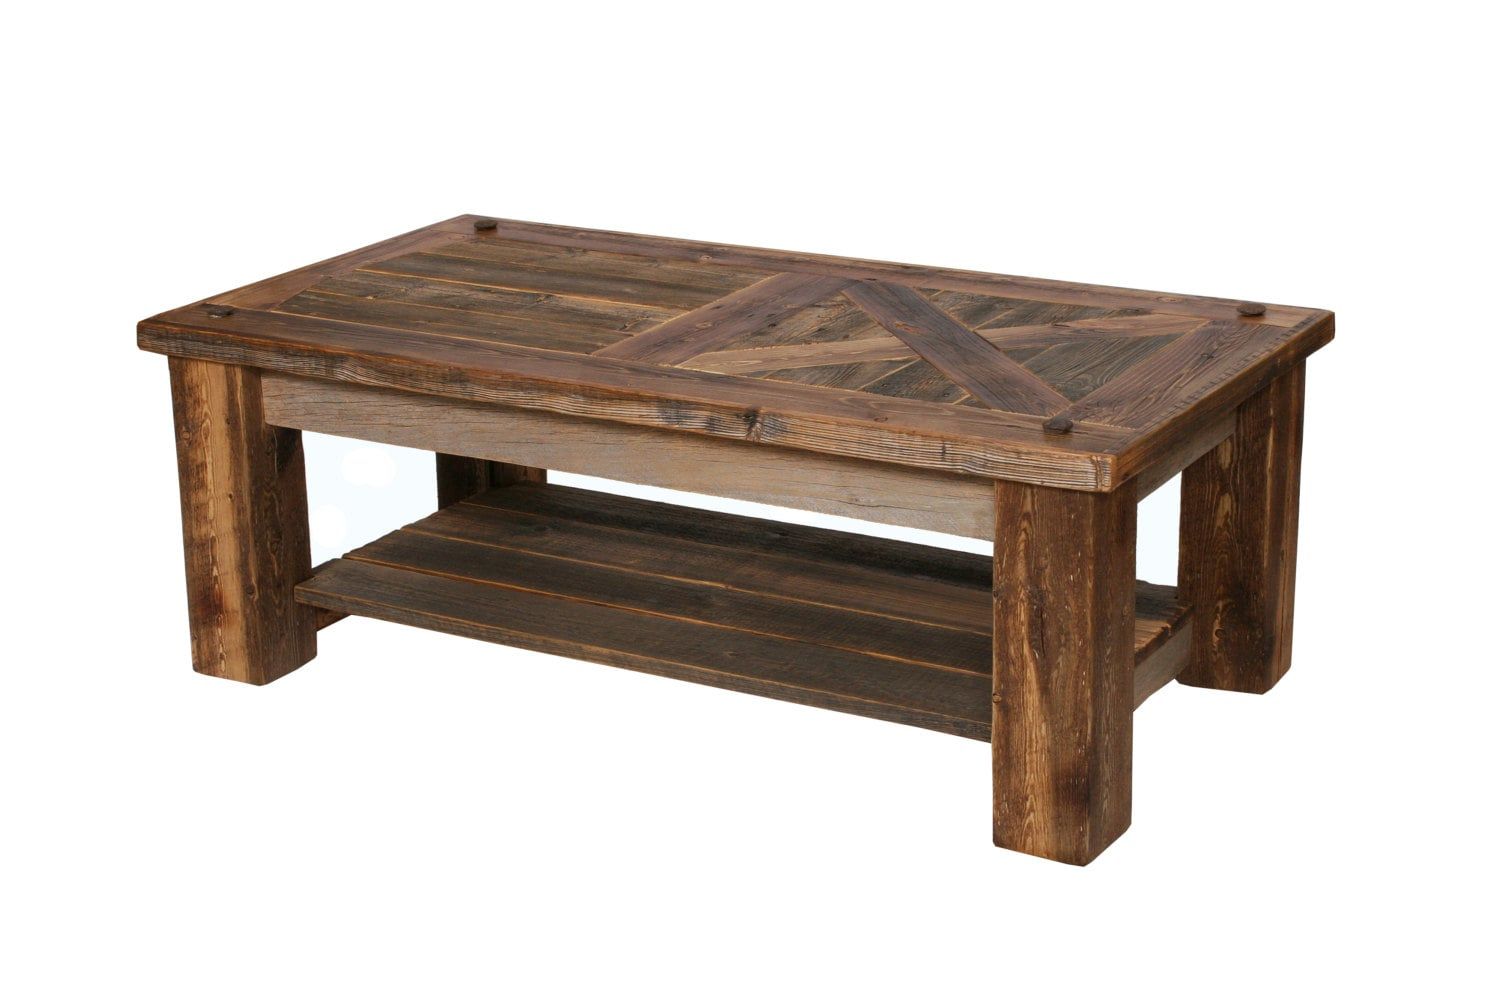 Barn Door Coffee Table Rustic Coffee Table Reclaimed Wood For Coffee Tables With Storage And Barn Doors (Gallery 6 of 20)